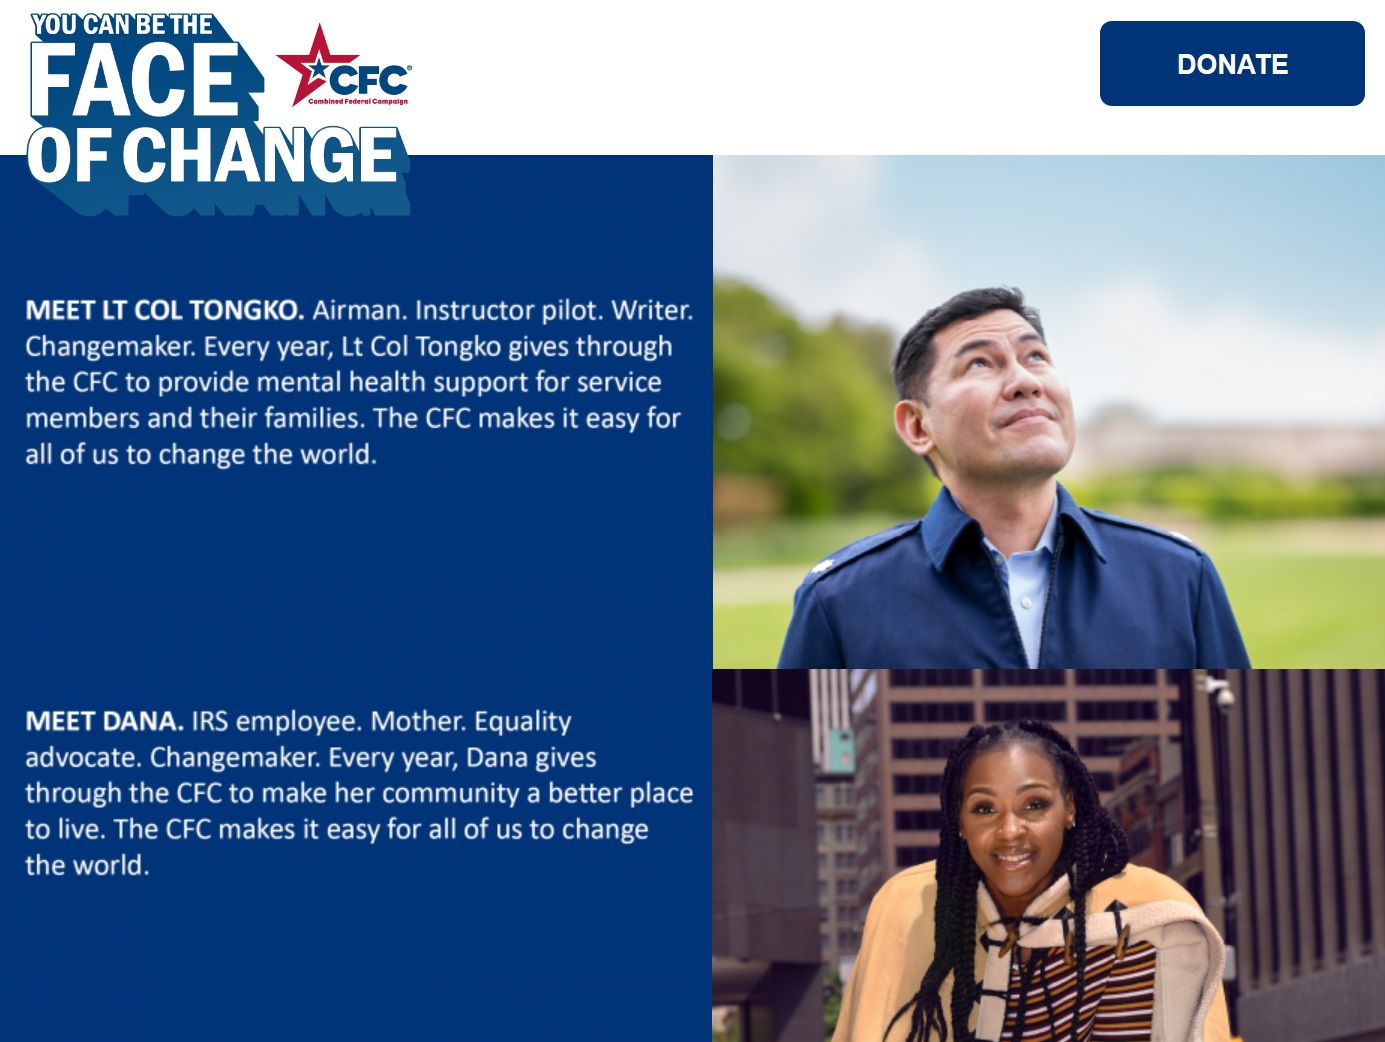 The U.S. Office of Personnel Management’s official Combined Federal Campaign web presence provides a one-stop donation site.